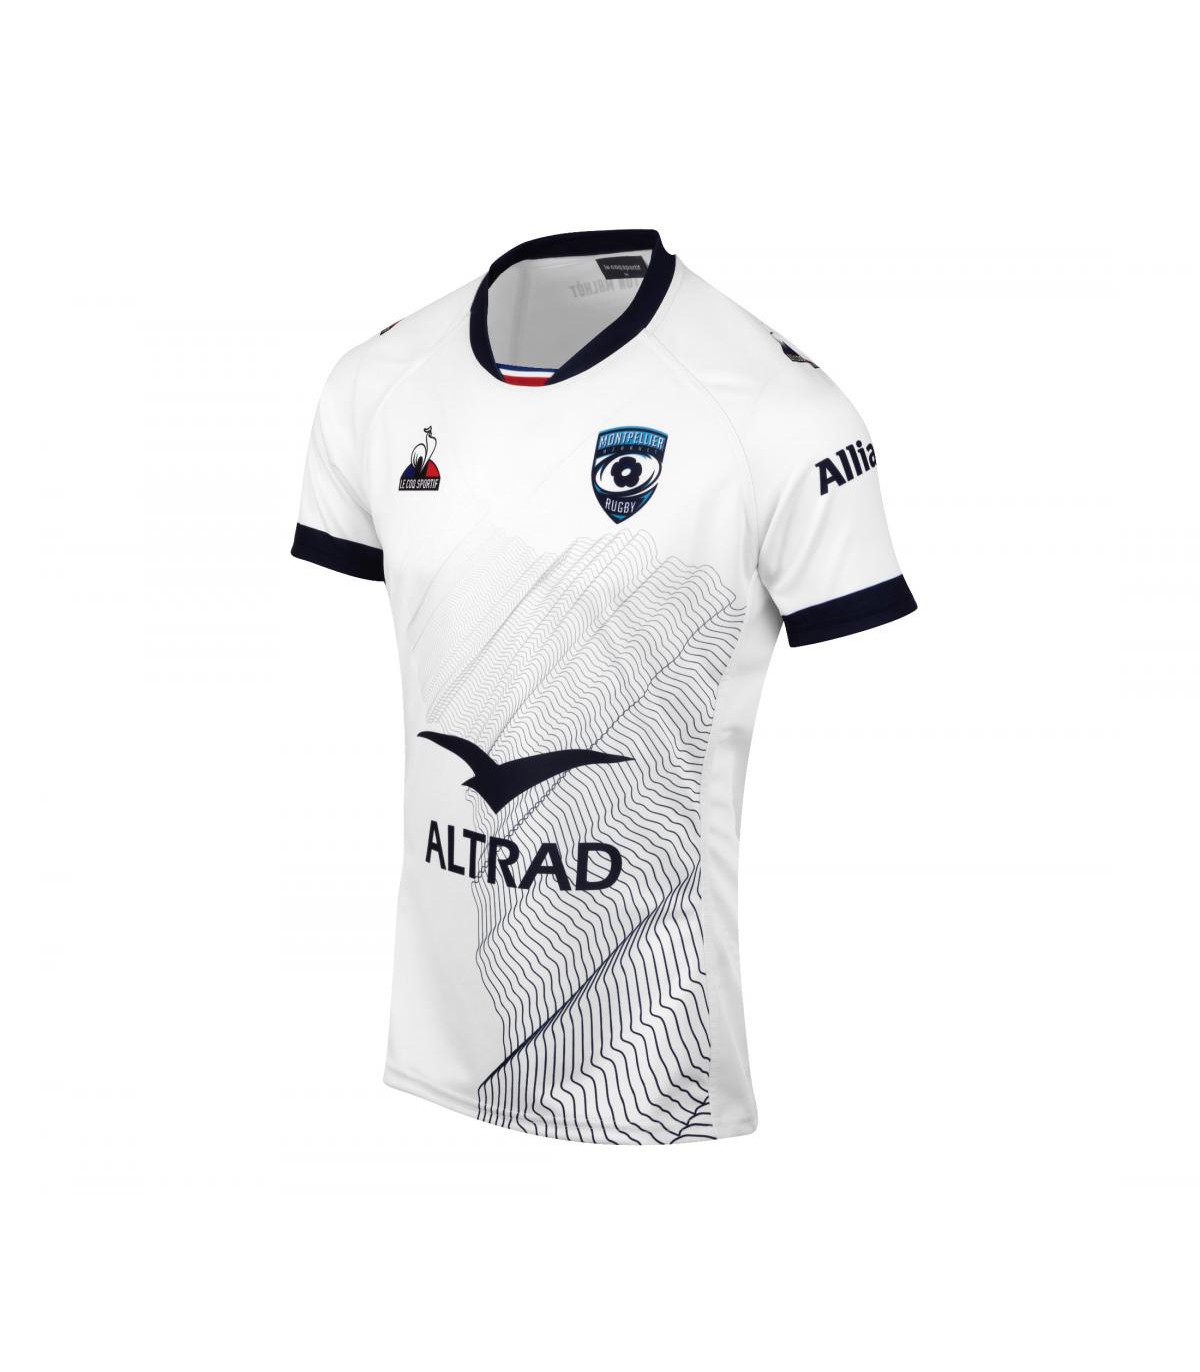 https://rugby-corner.com/19696-superlarge_default/maillot-rugby-montpellier-herault-rugby-exterieur-2022-2023-le-coq-sportif-boutique-rugby-corner.jpg